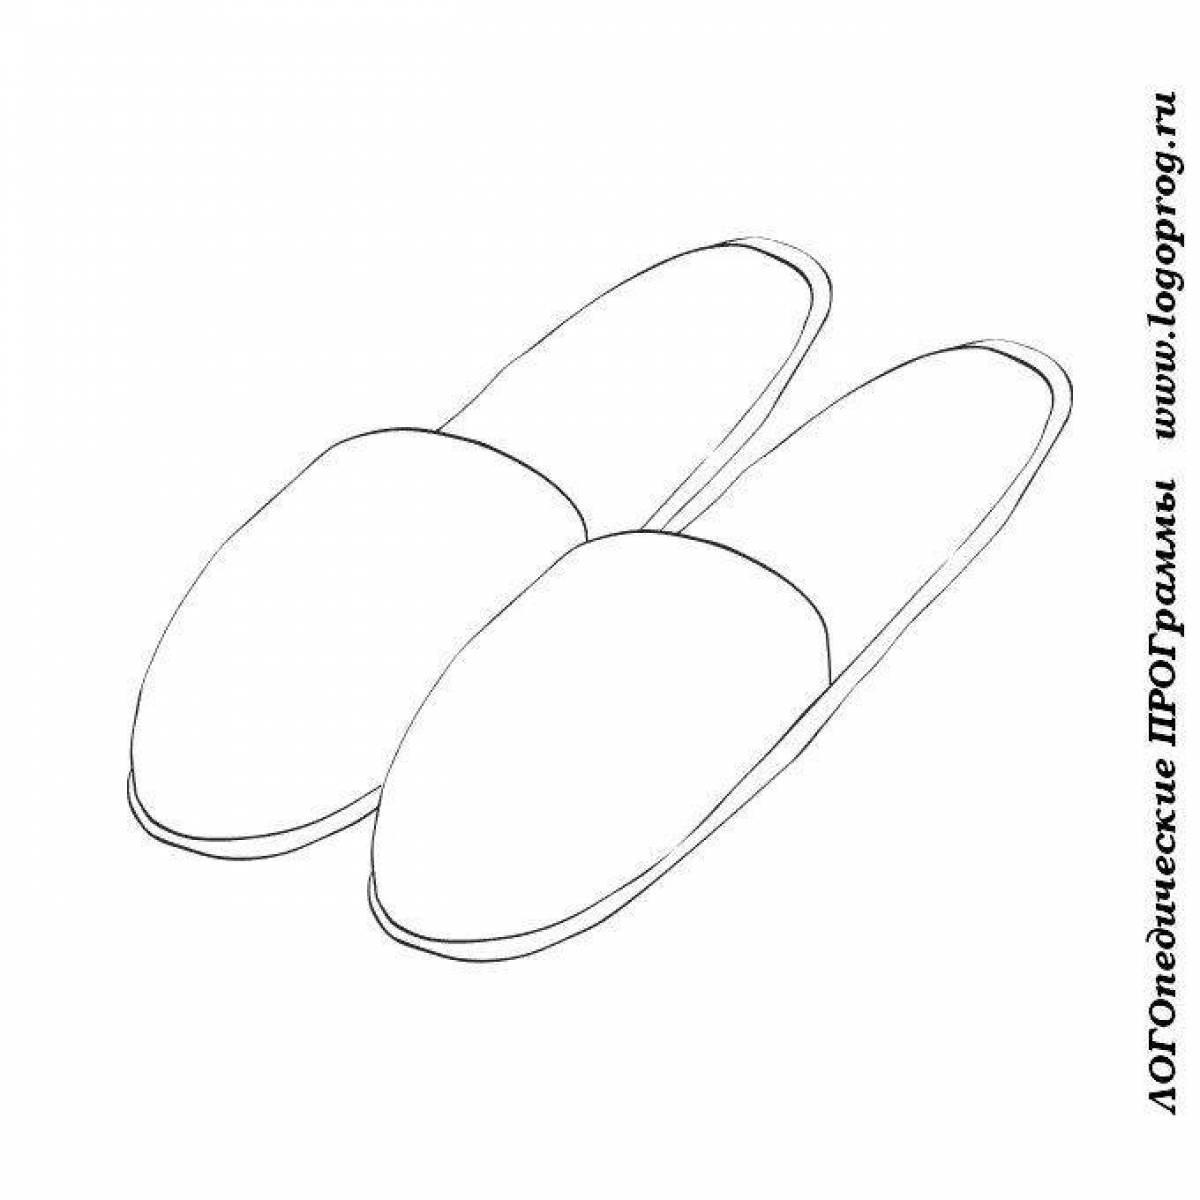 Coloring page delightful slippers